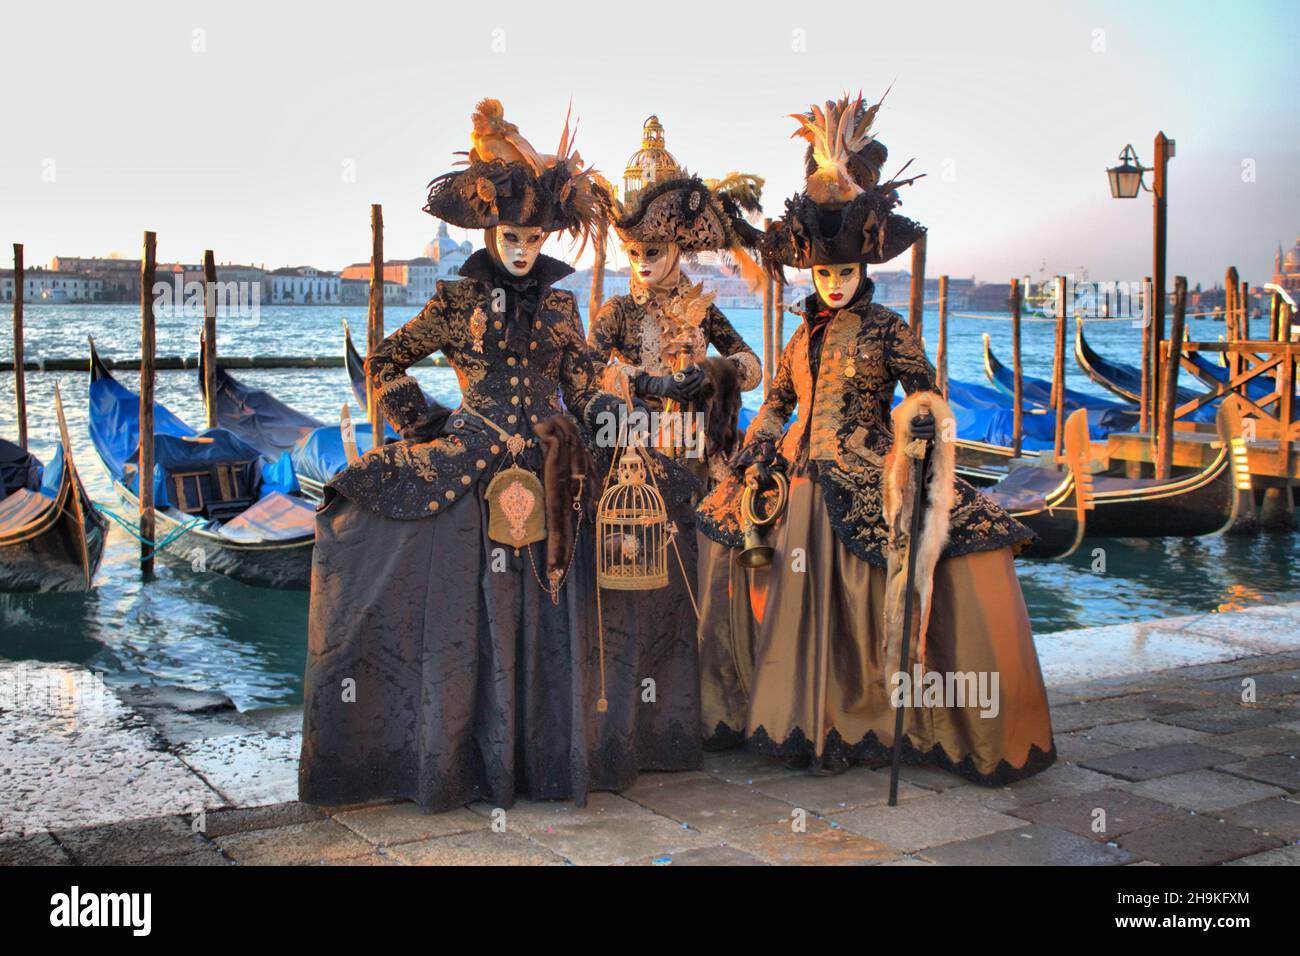 Venice, Italy - February 10, 2018: Three people in Venetian costume attends the Carnival of Venice, Italy Stock Photo